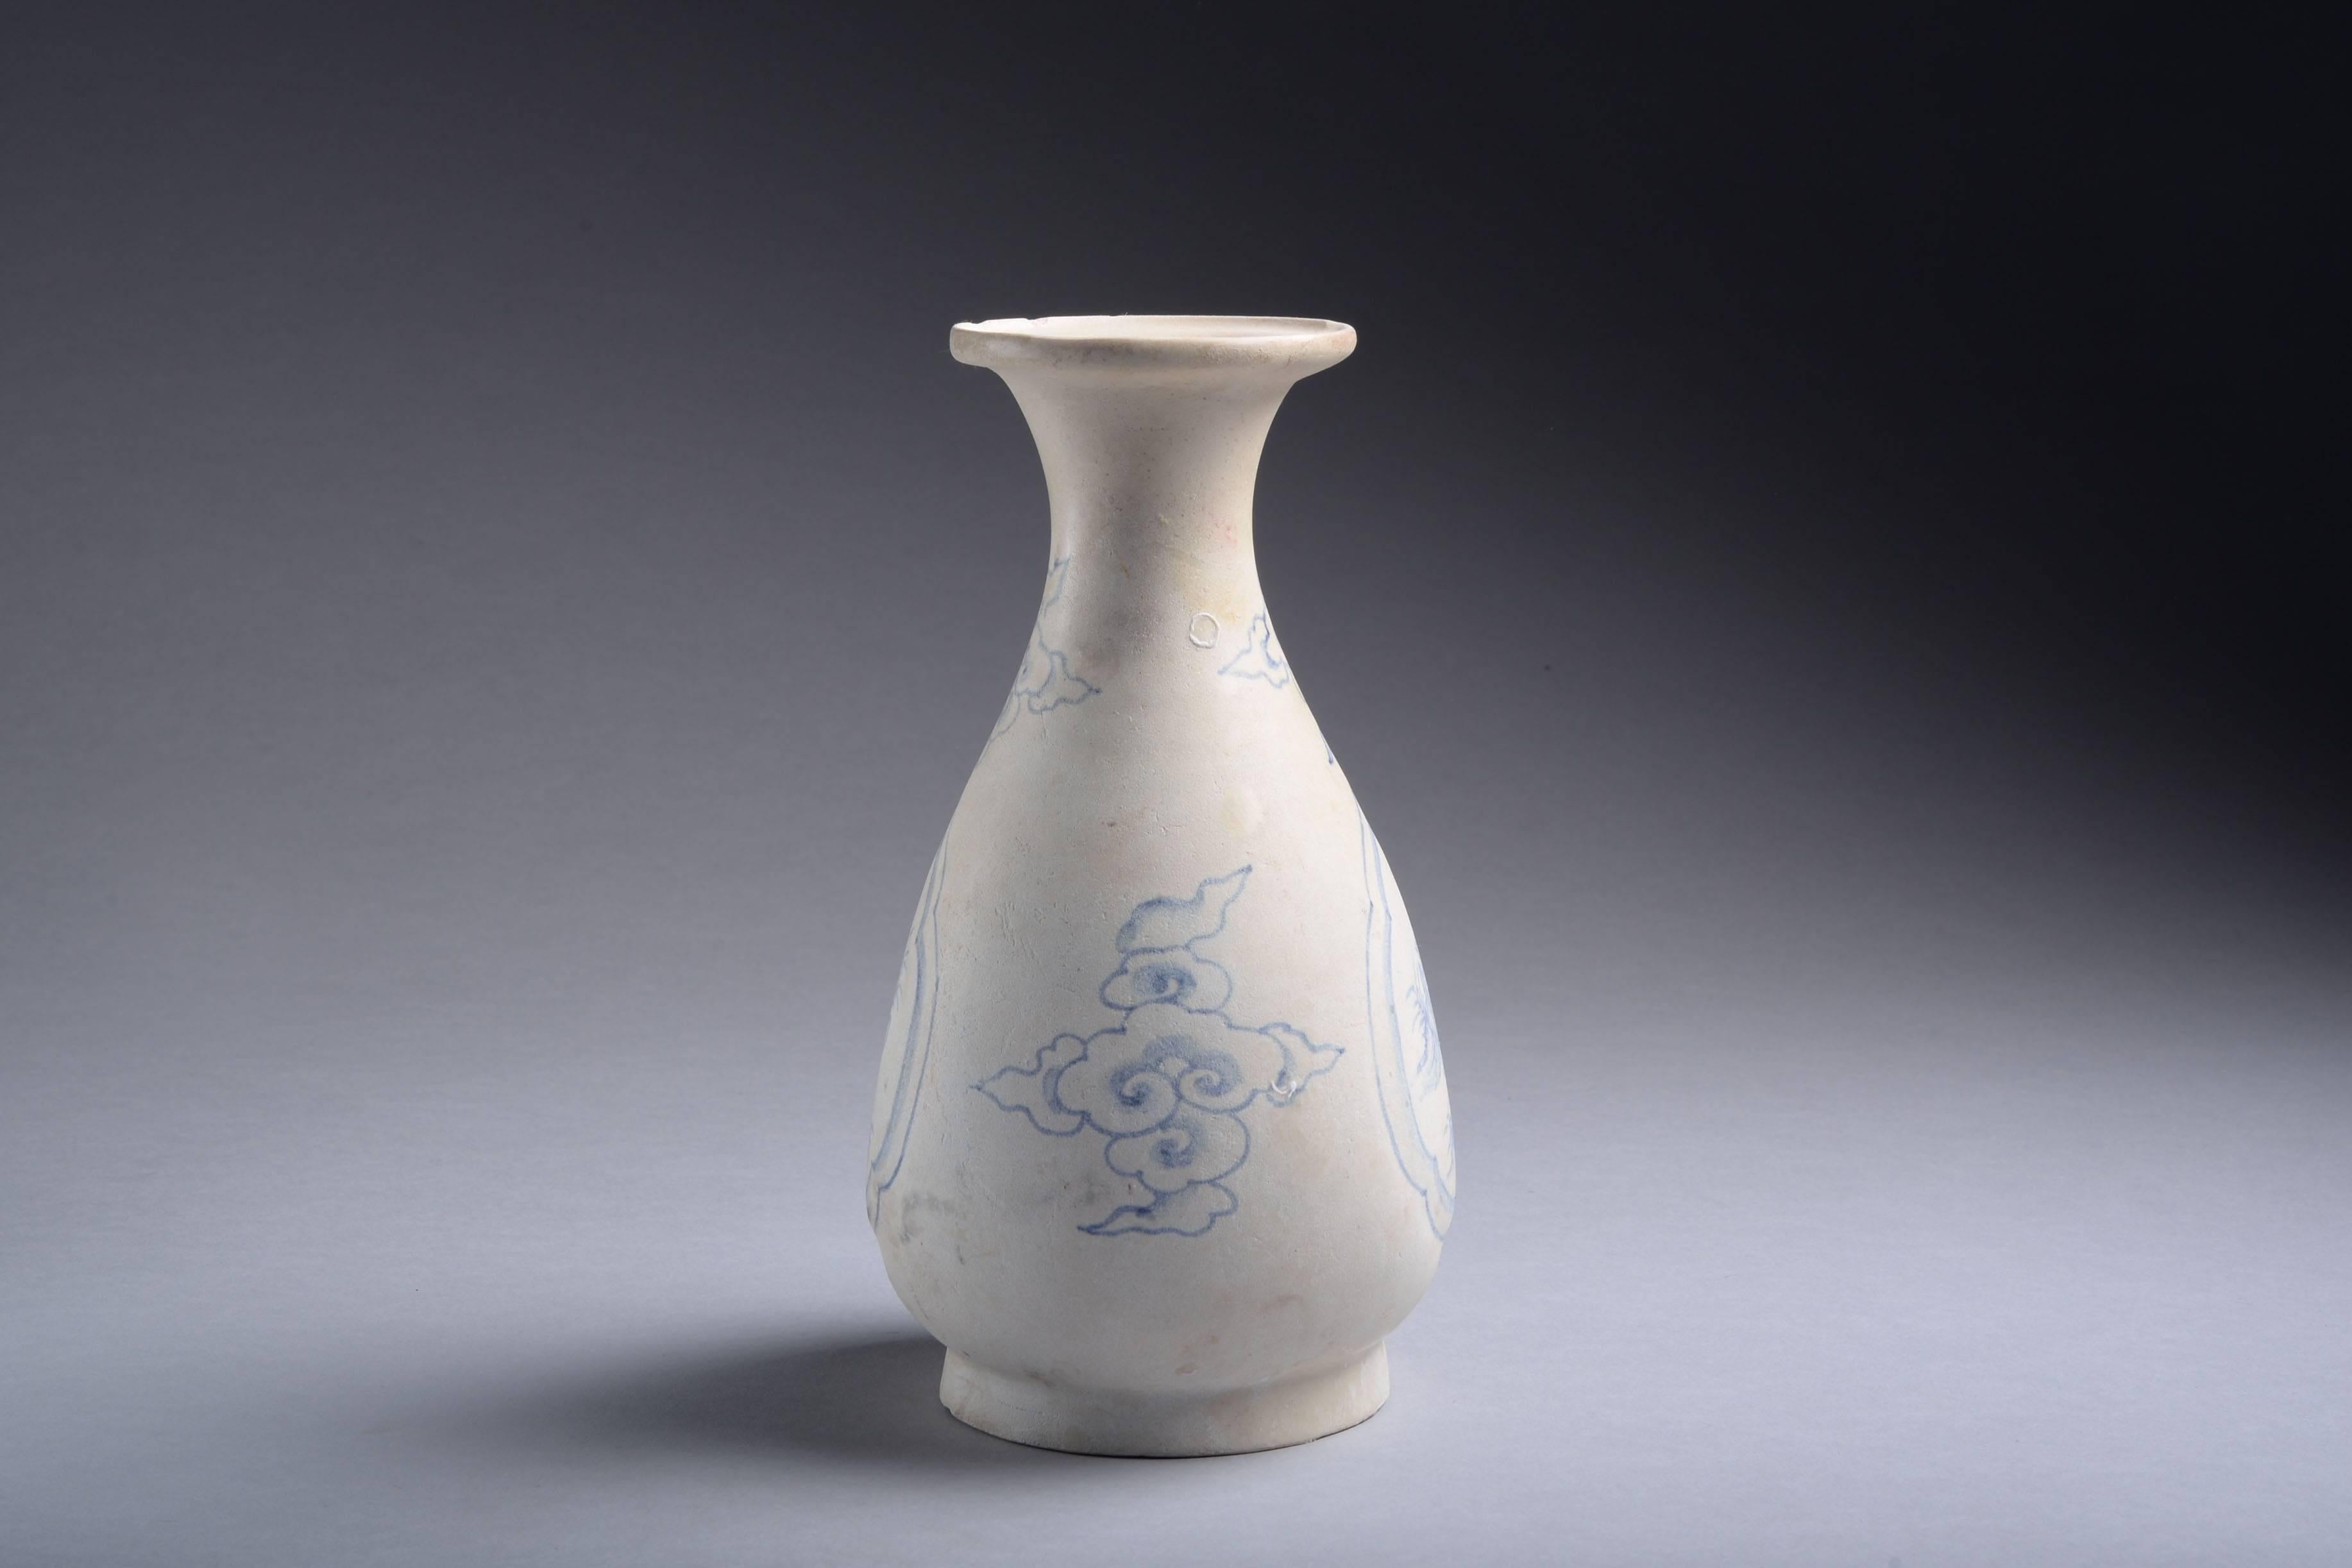 18th Century and Earlier 15th Century Chinese Blue and White Vase from the Hoi An Shipwreck